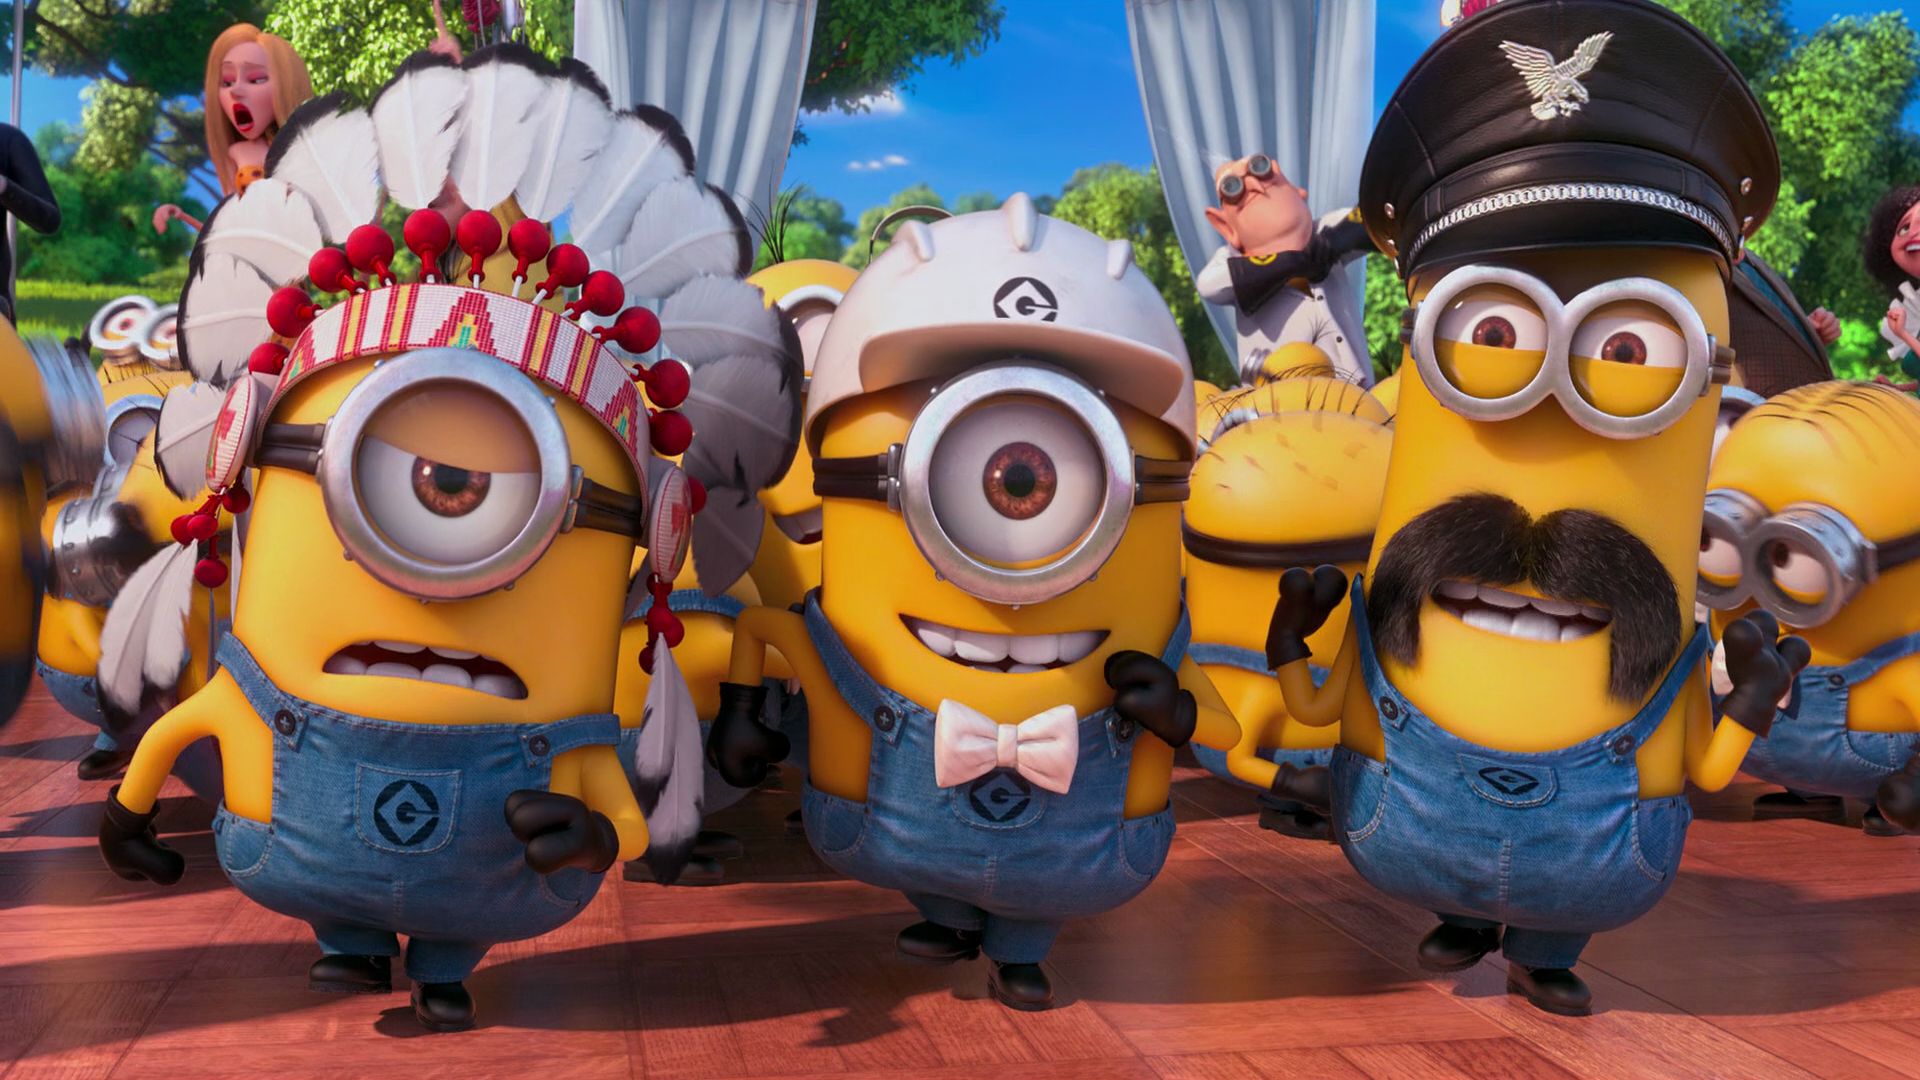 despicable me, movie, despicable me 2 lock screen backgrounds